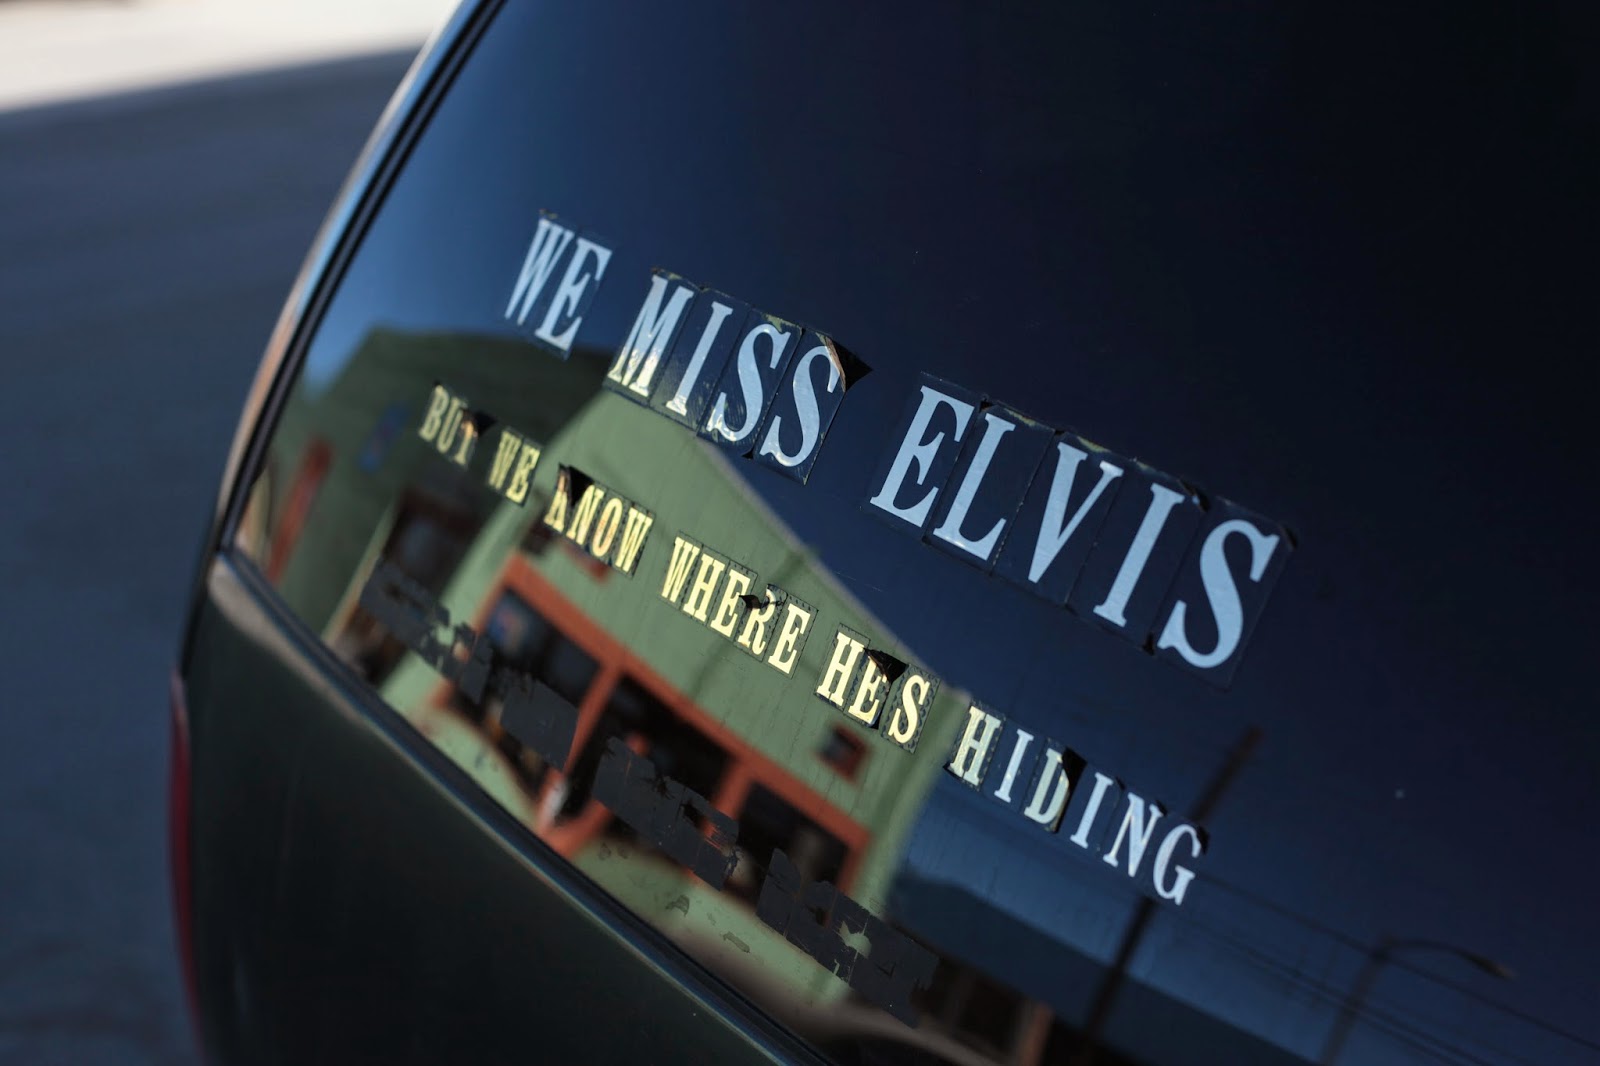 A bumper sticker in Salida, CO that says, "We Miss Elvis But We Know Where He Is".